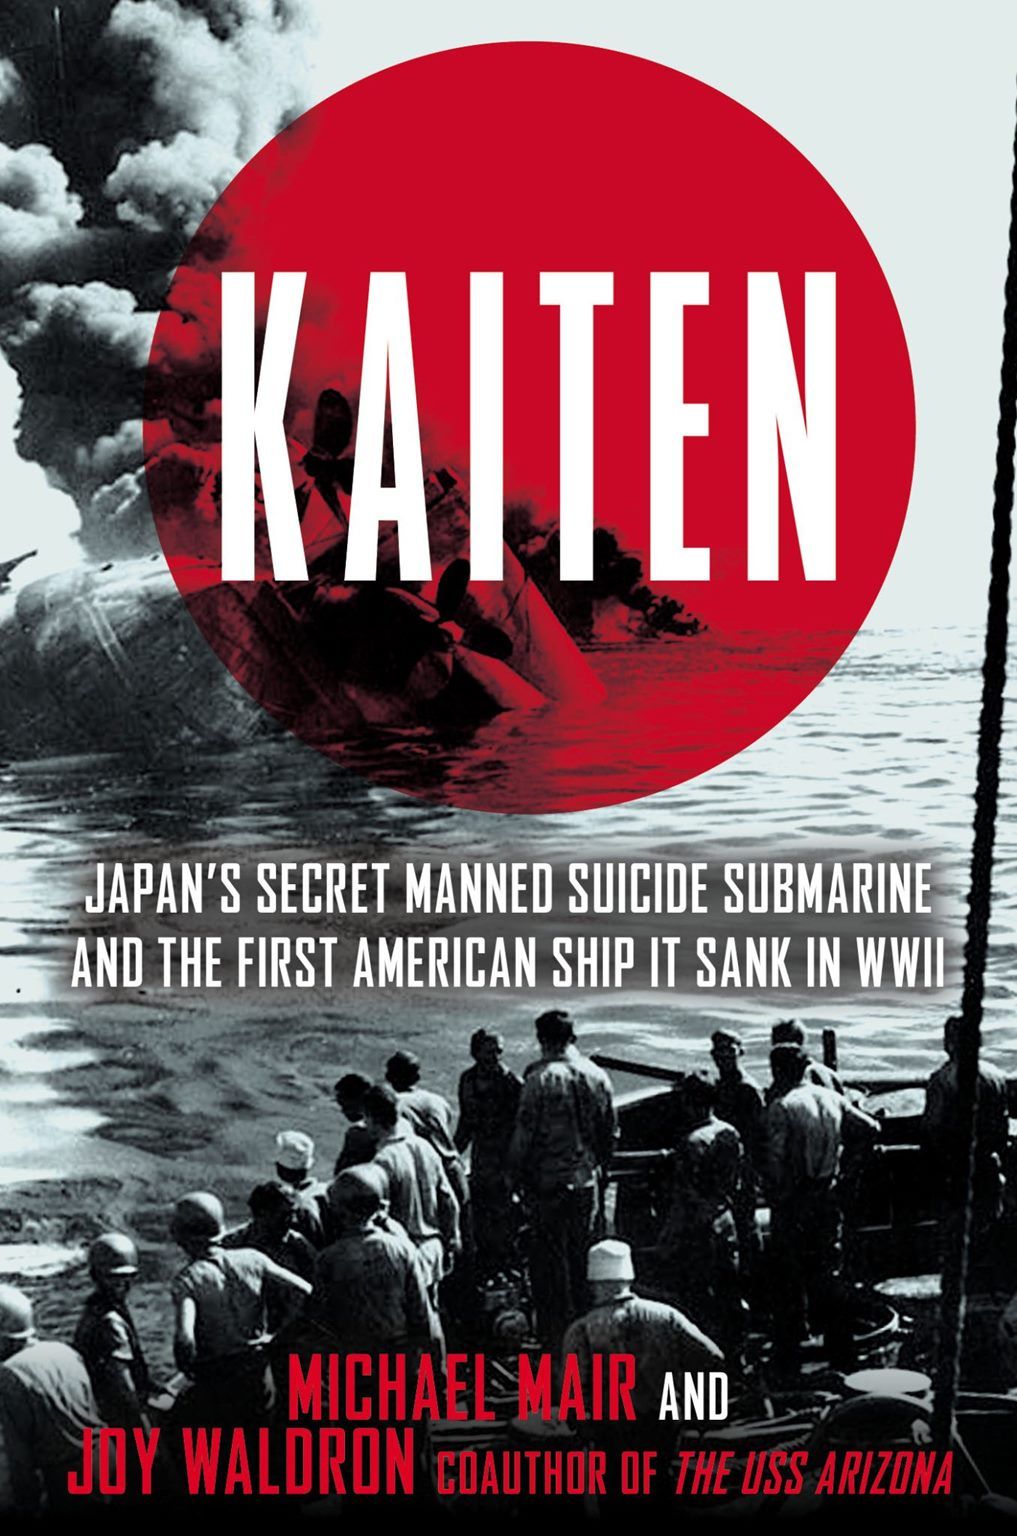 KAITEN: Japan's Secret Suicide Submarine and the First American Ship It Sank